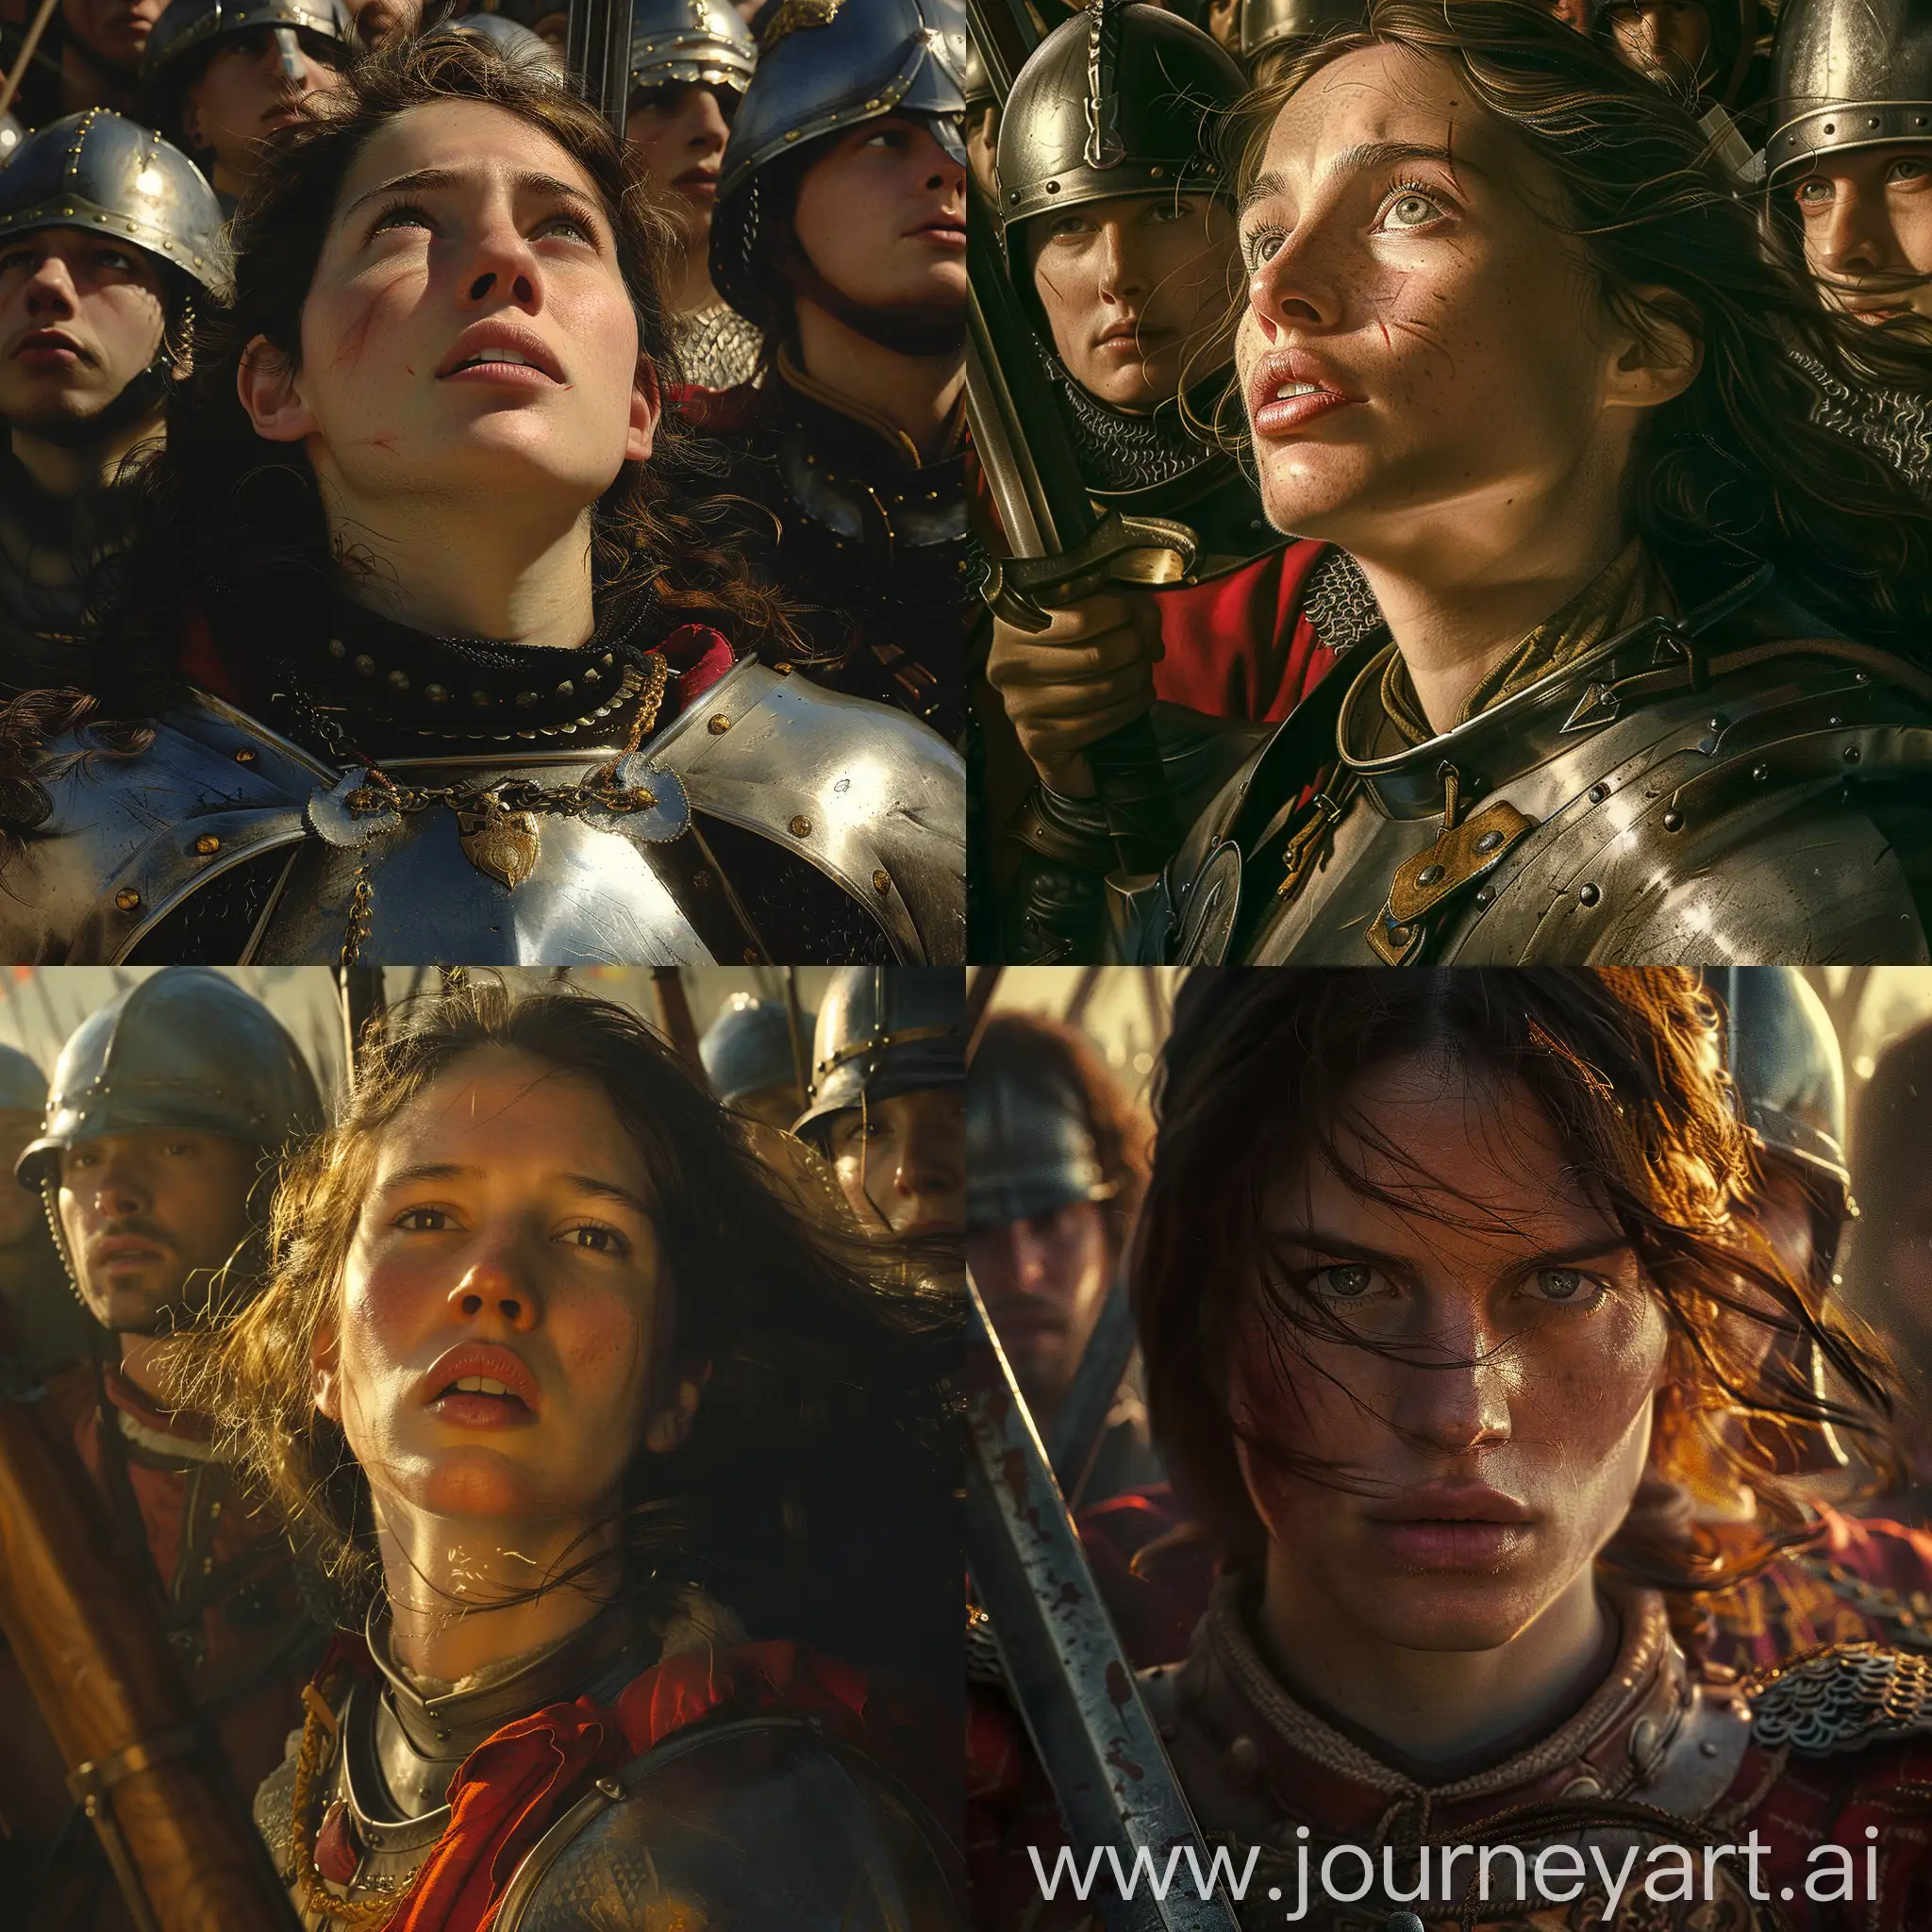 Famous female warrior Joan of Arc at Siege of Orleans, French warriors behind her, close up, dramatic lighting, realistic image